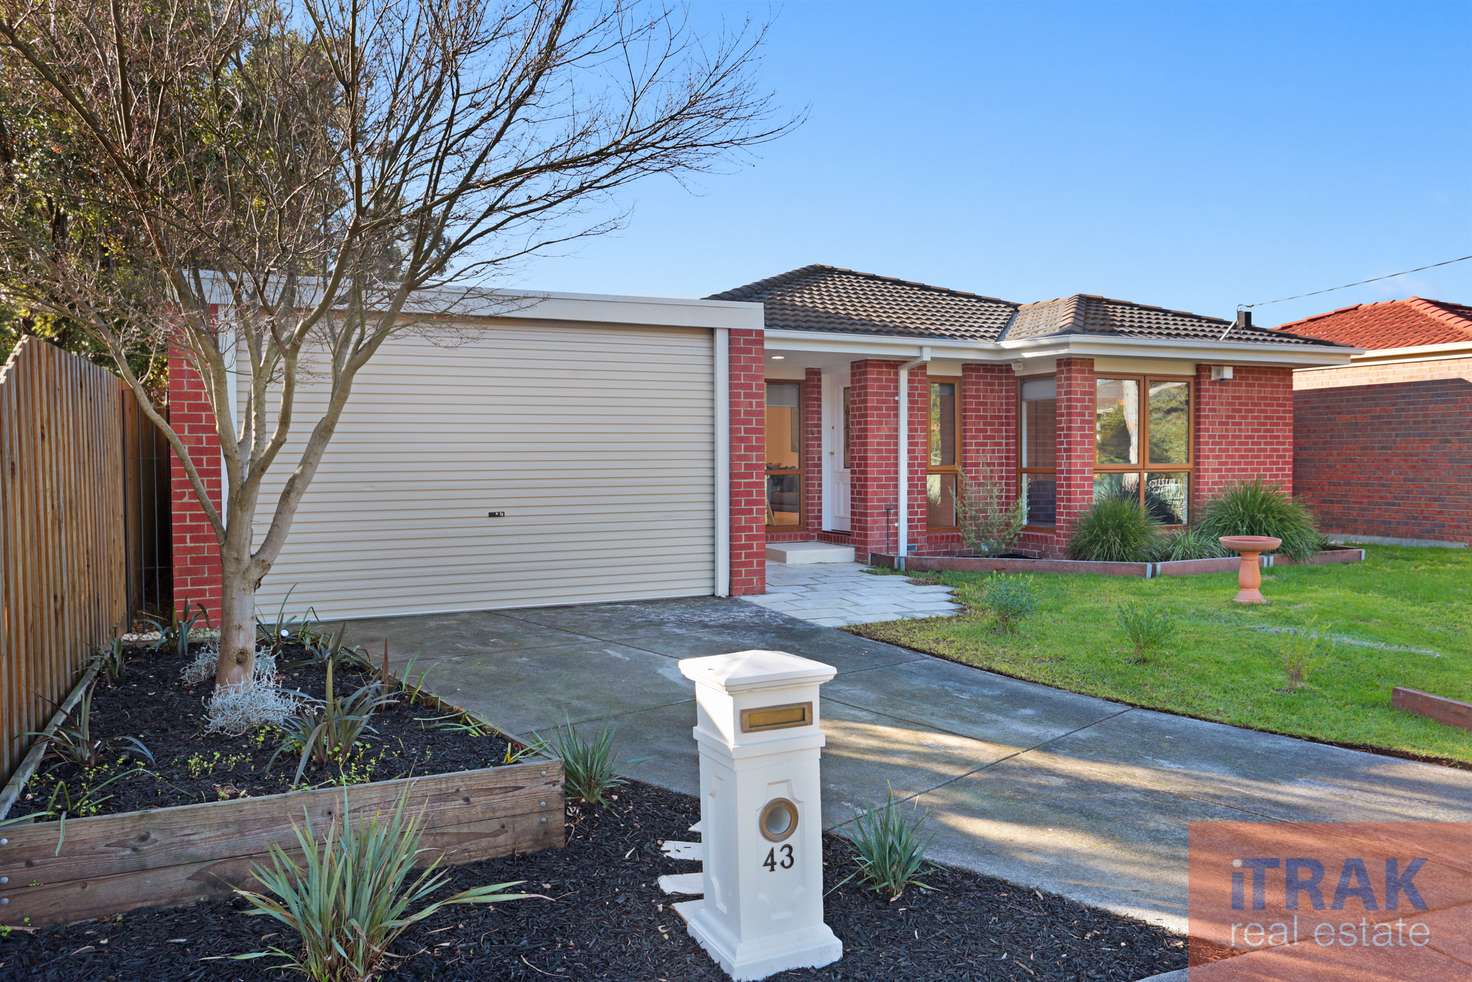 Main view of Homely house listing, 43 Terama Crescent, Bayswater VIC 3153